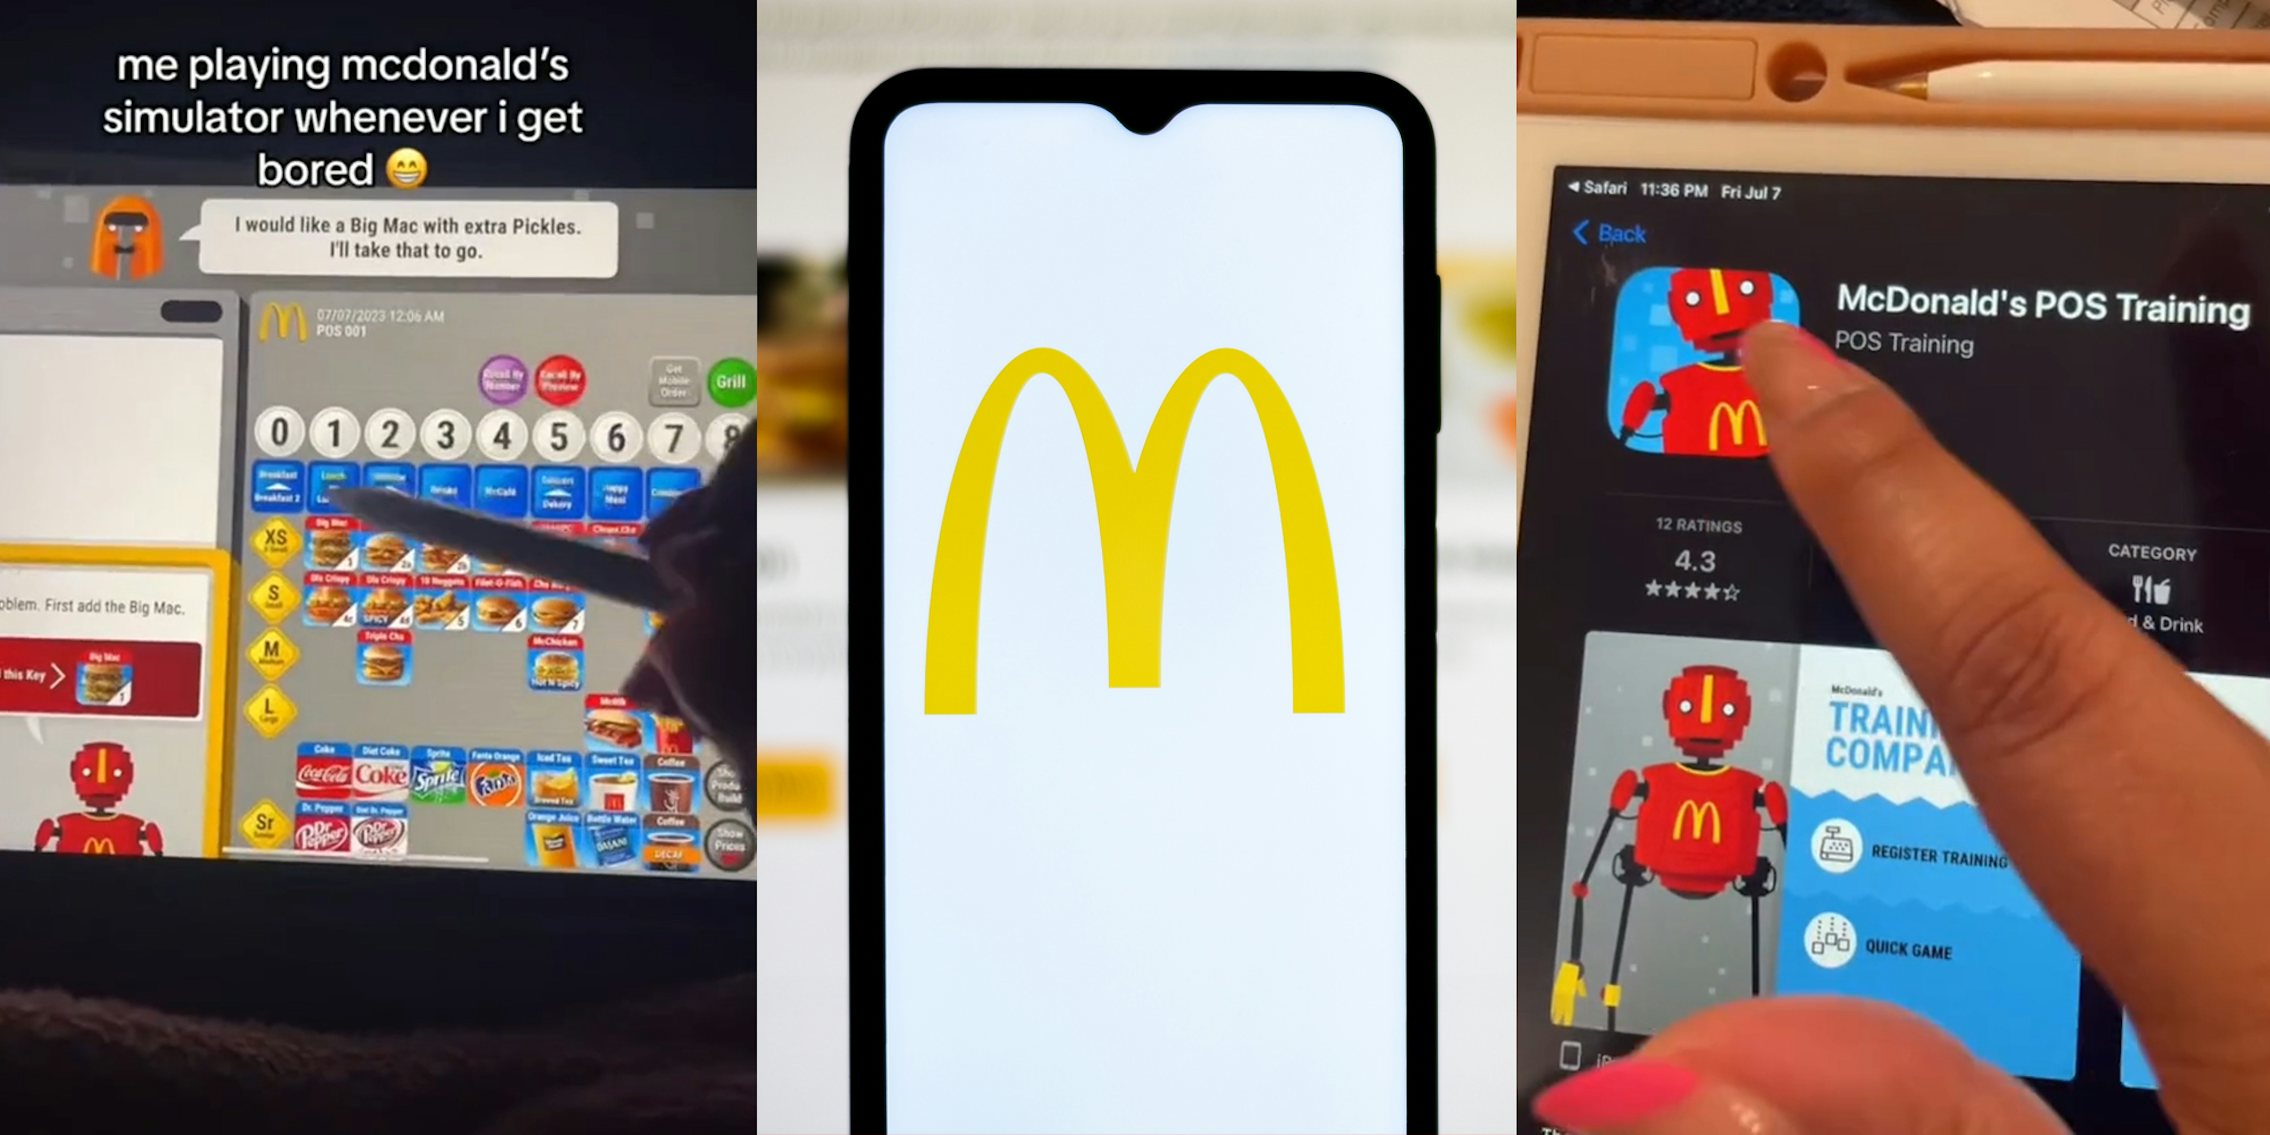 McDonald's pos training app on tablet with caption 'me playing mcdonald's simulator whenever i get bored' (l) McDonald's logo on phone screen (c) McDonald's training app in app store on tablet (r)